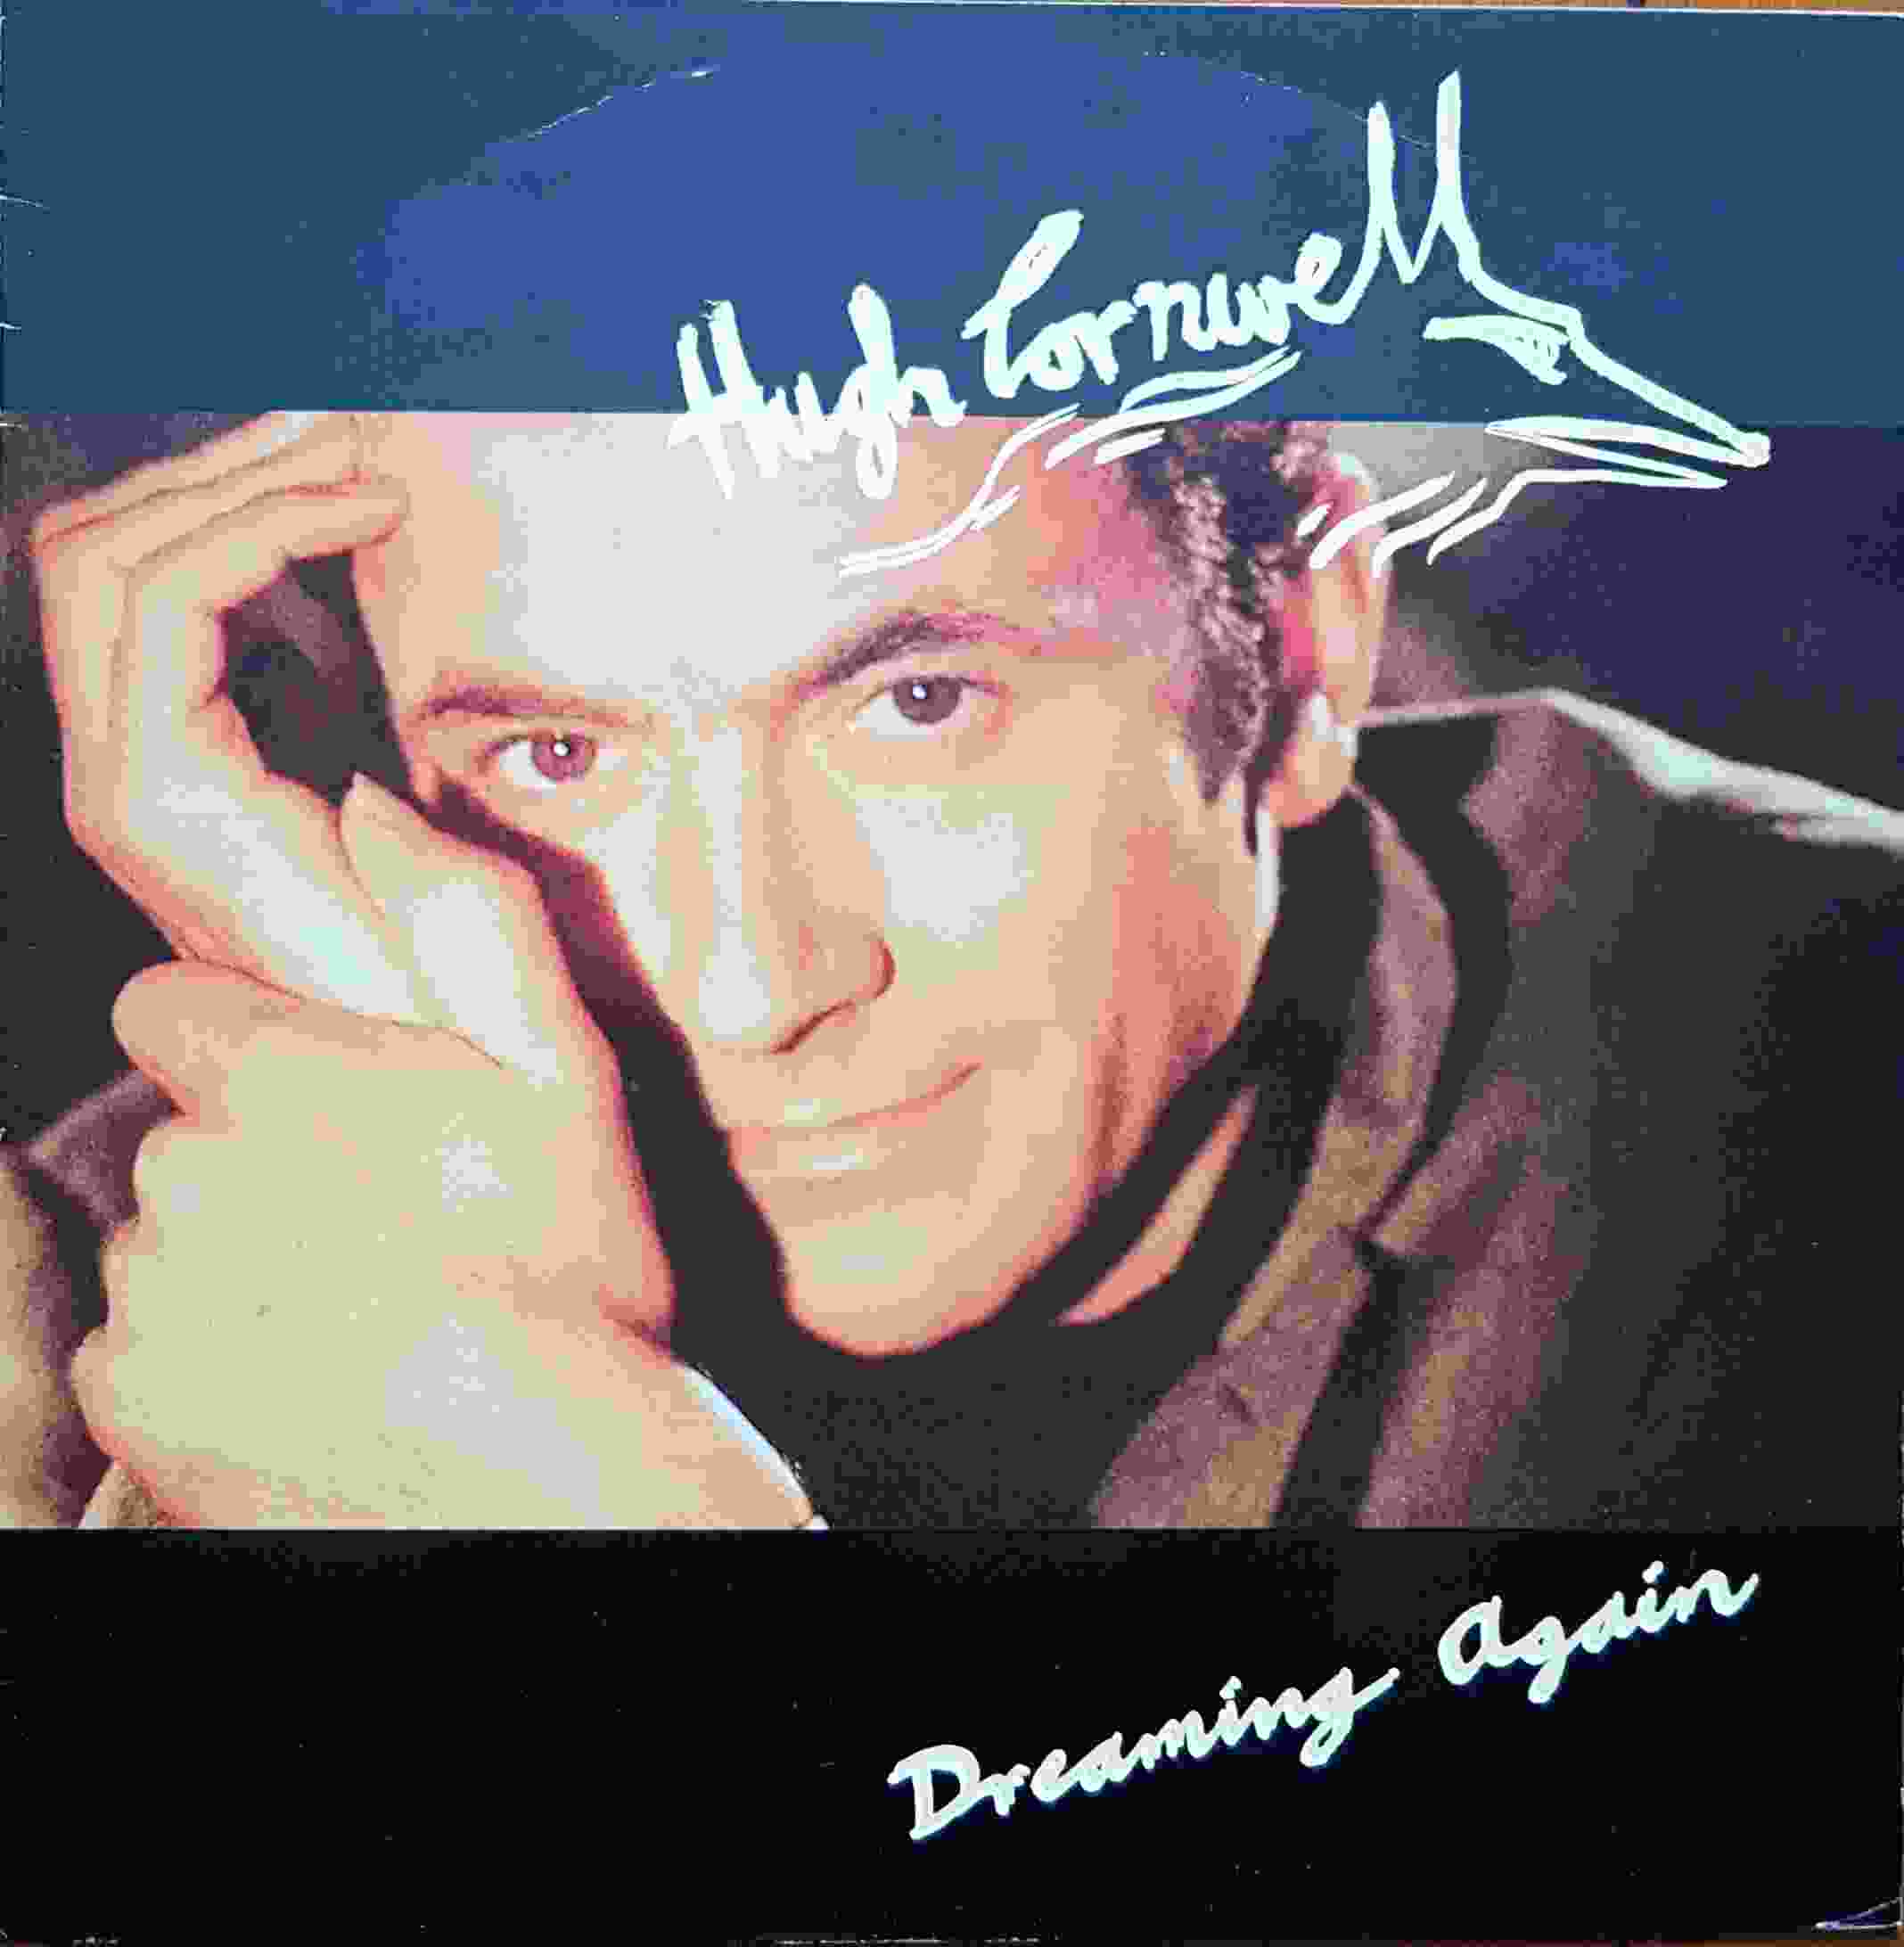 Picture of Dreaming again by artist Hugh Cornwell  from The Stranglers 12inches